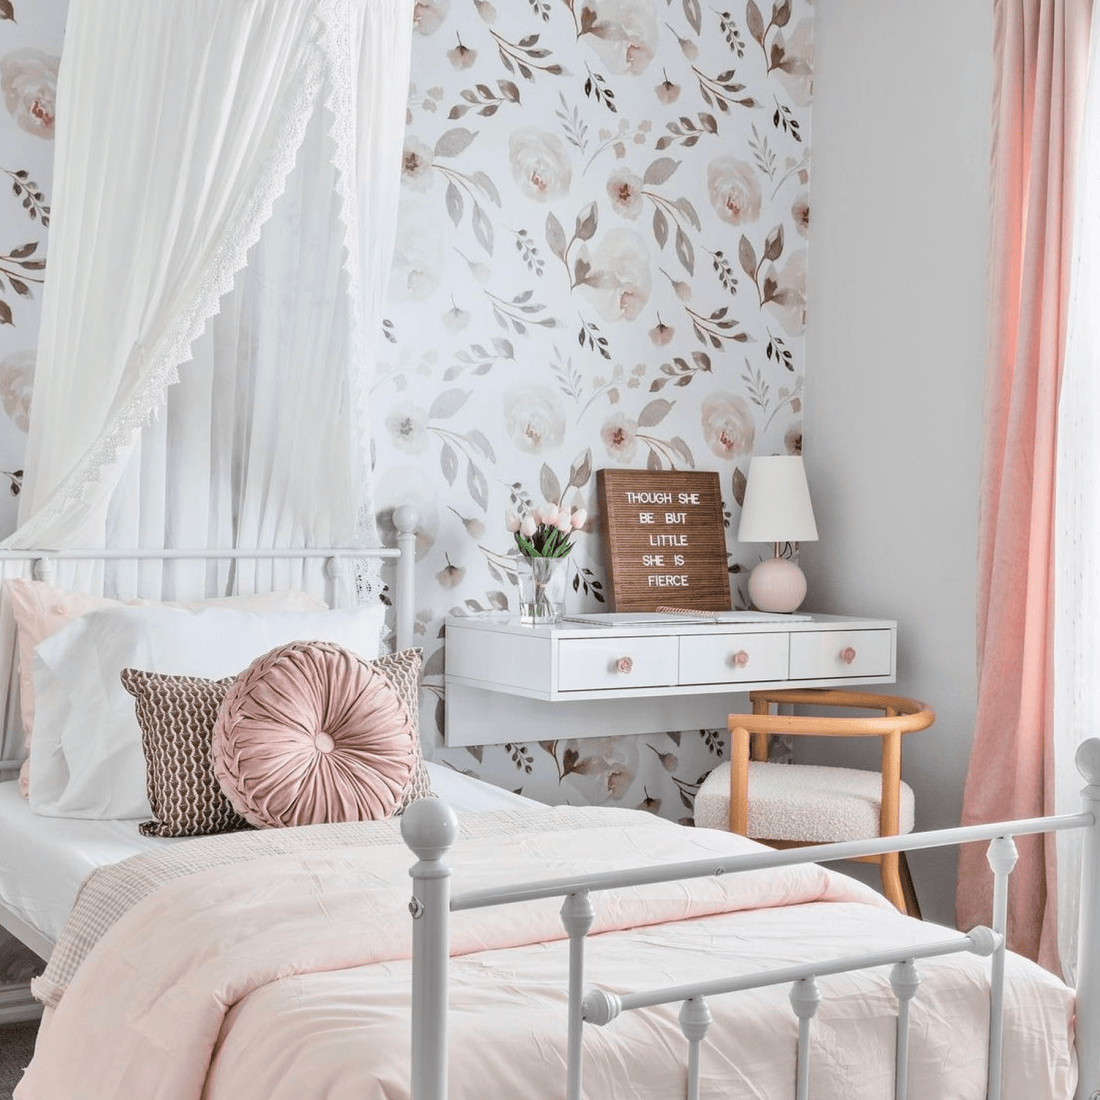 Patterned wallpaper and blind in teenager girls bedroom with white